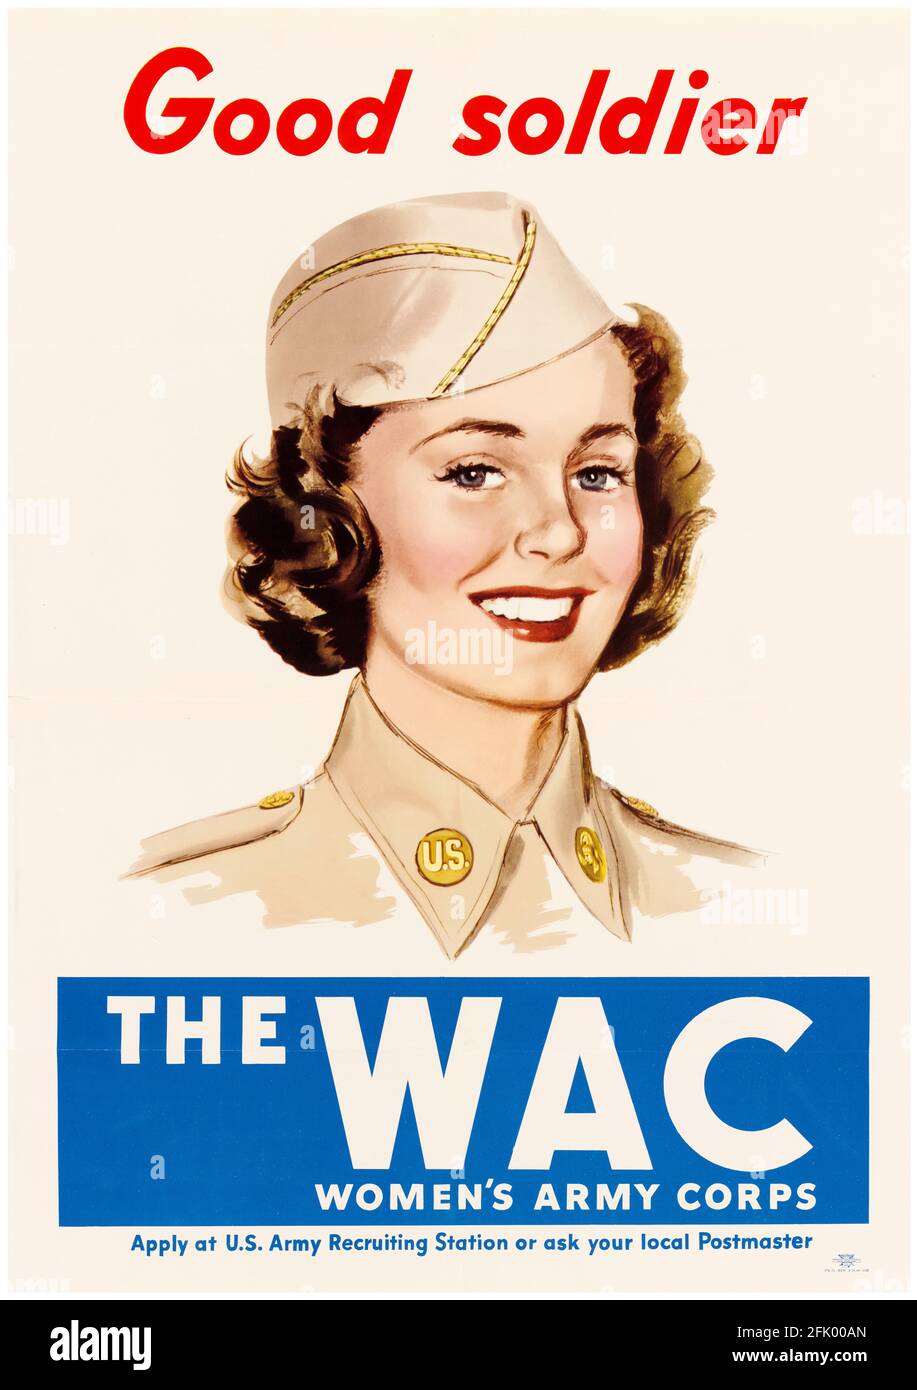 Good Soldier, The WAC, Women's Army Corps, American, WW2 female war work poster, 1941-1945 Stock Photo